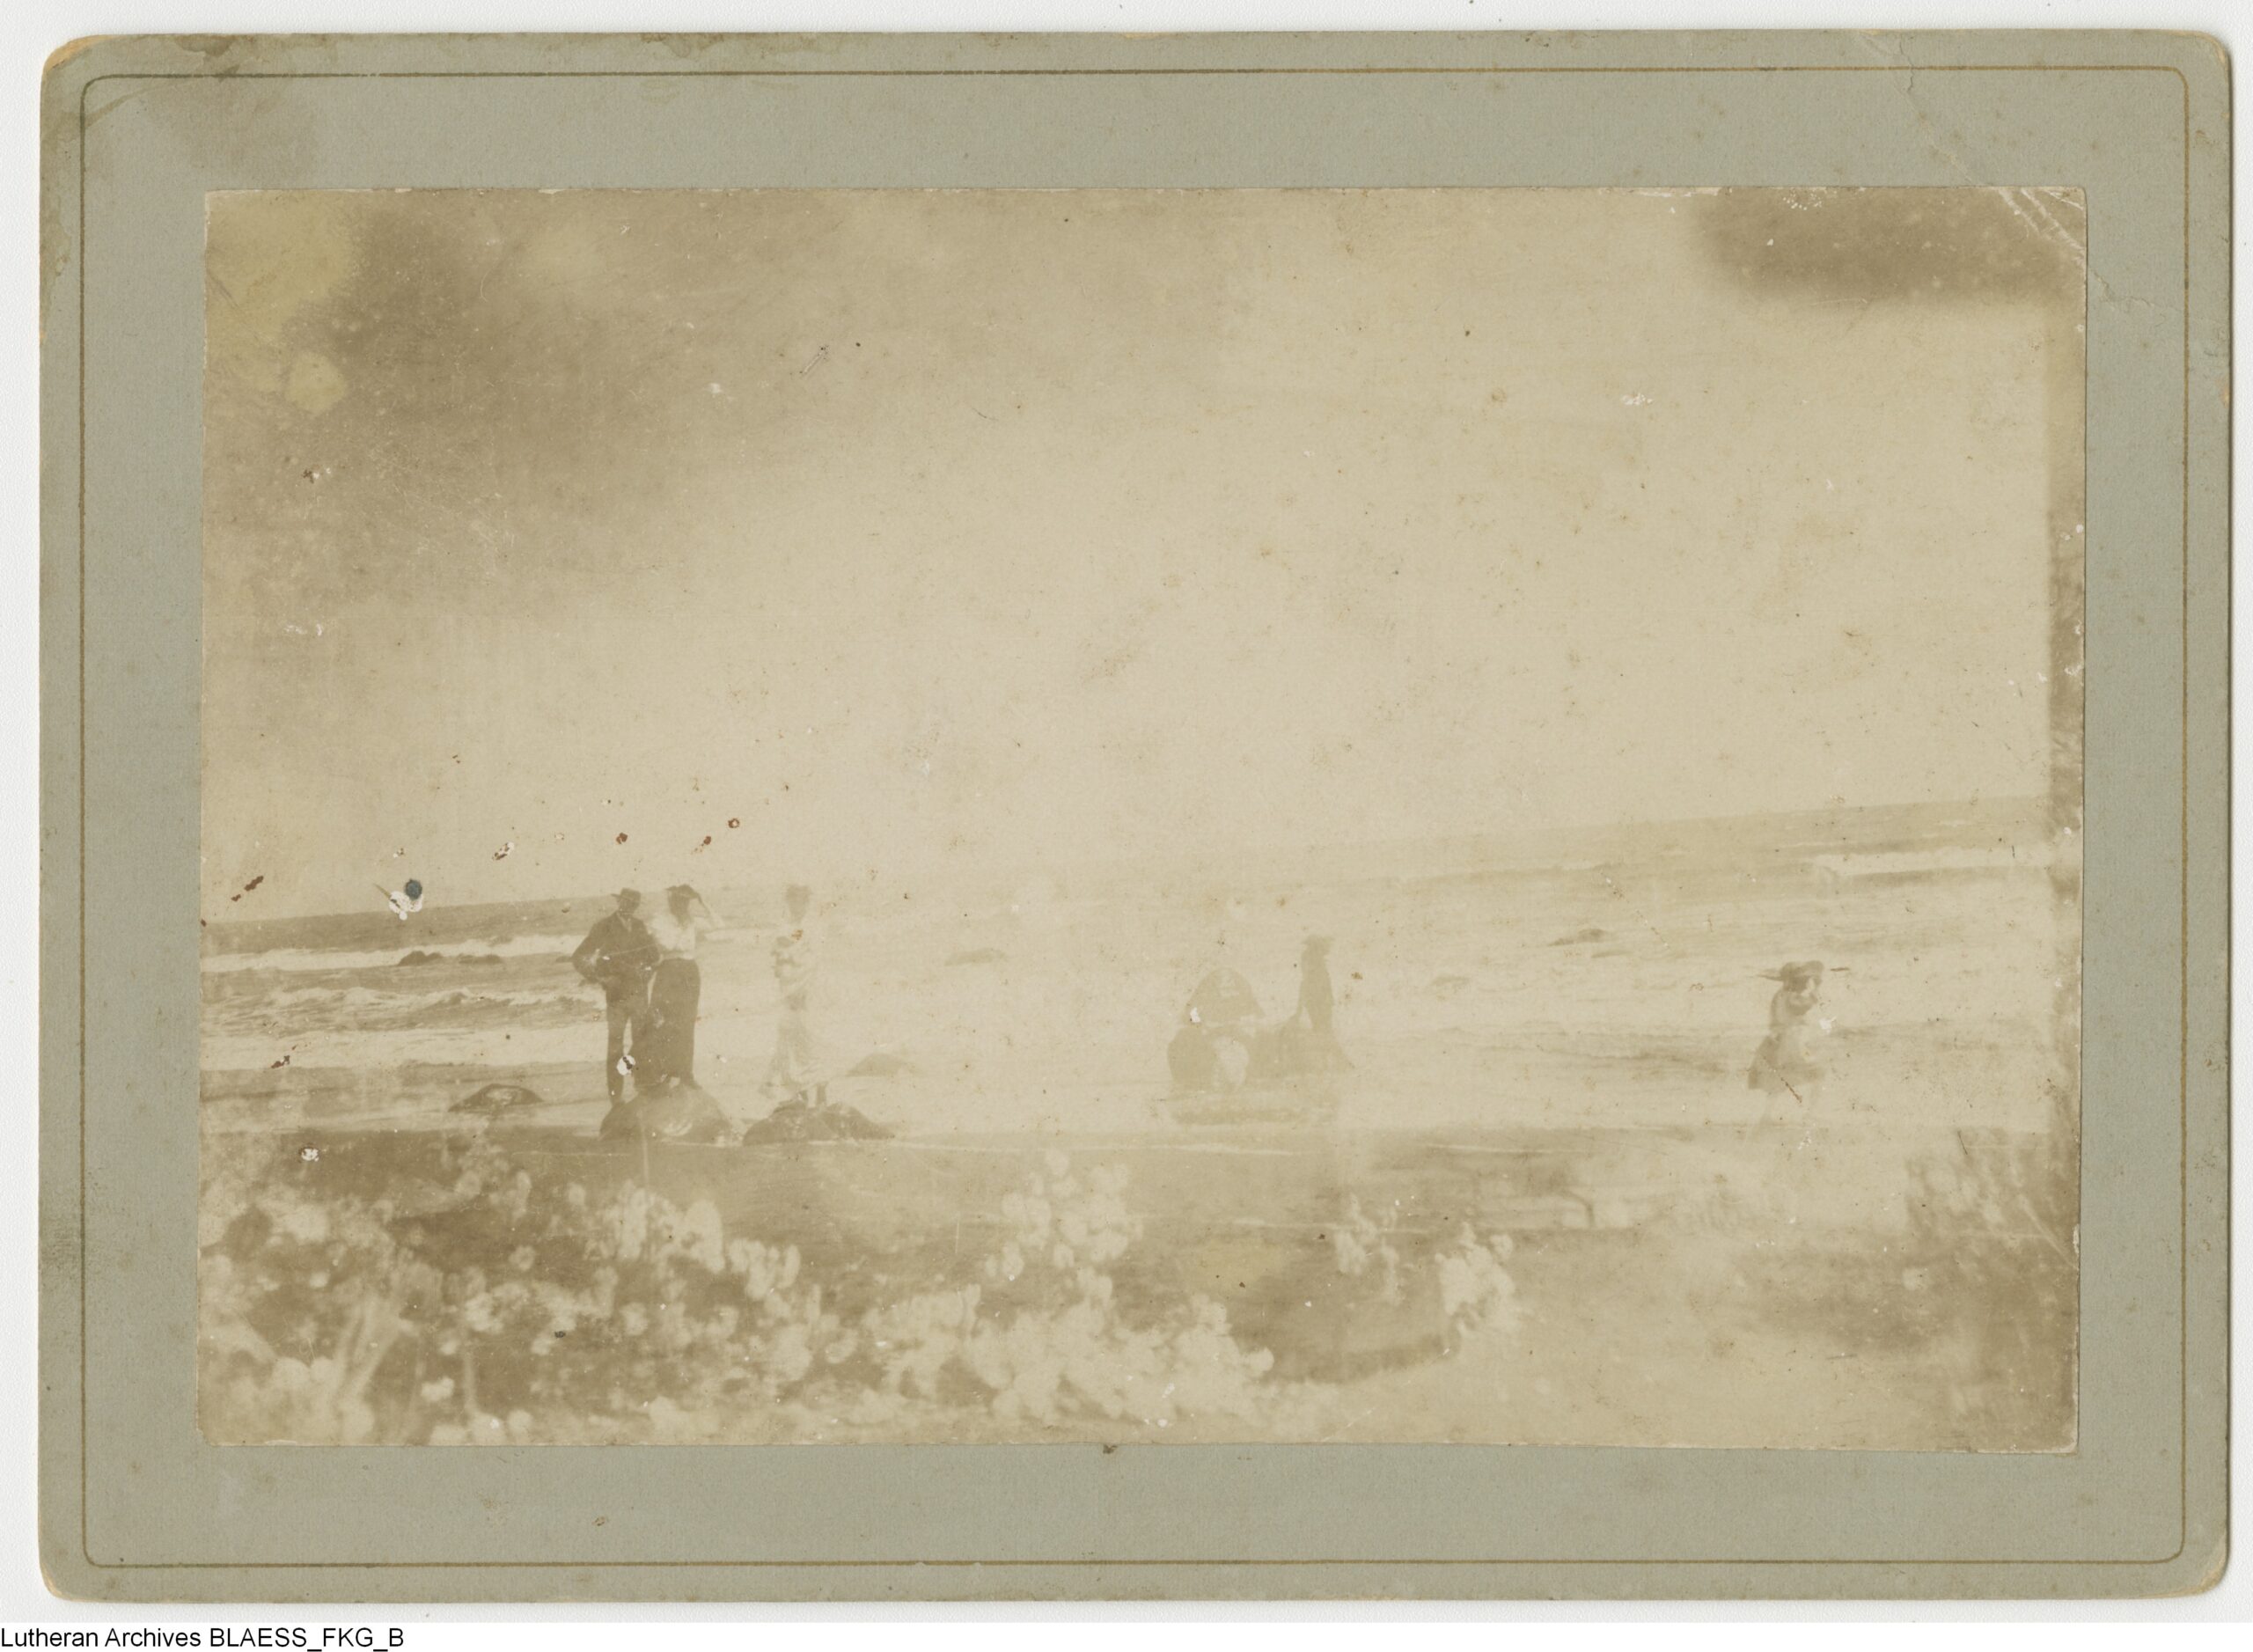 Photograph from Blaess's personal papers: New Zealand coast at Normanby, where Blaess's first mission station was built.